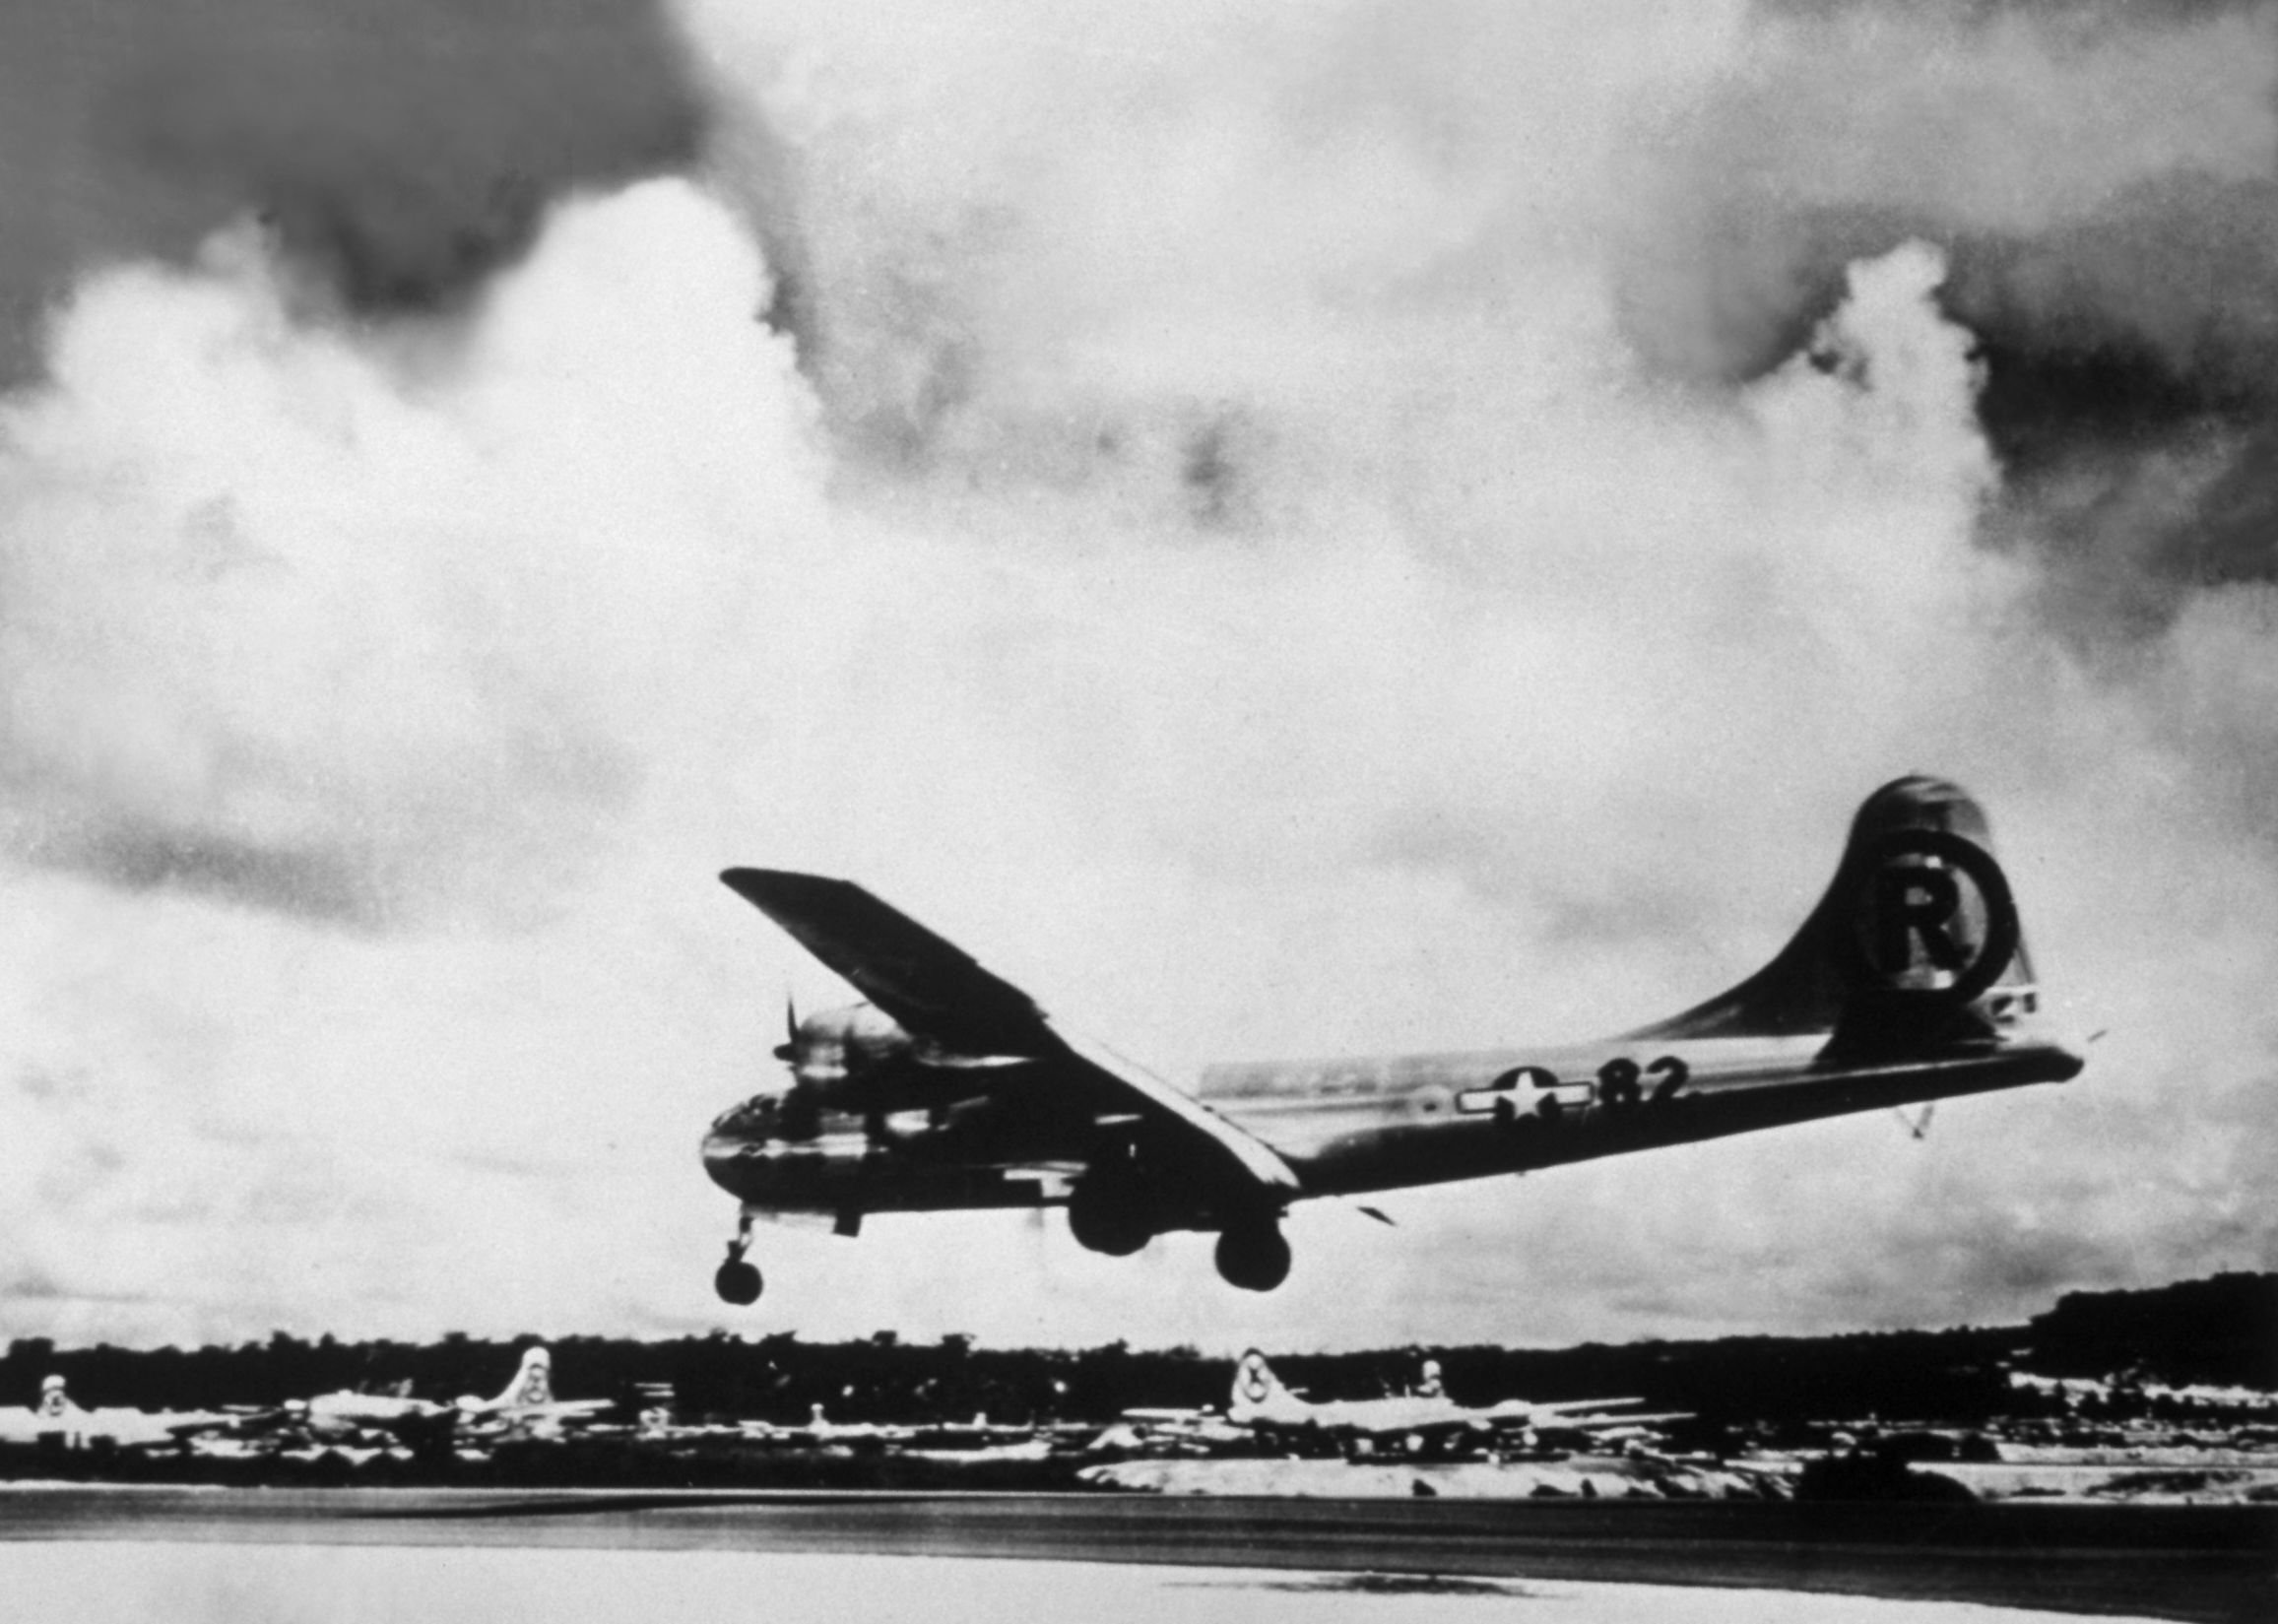 why was the plane called the enola gay